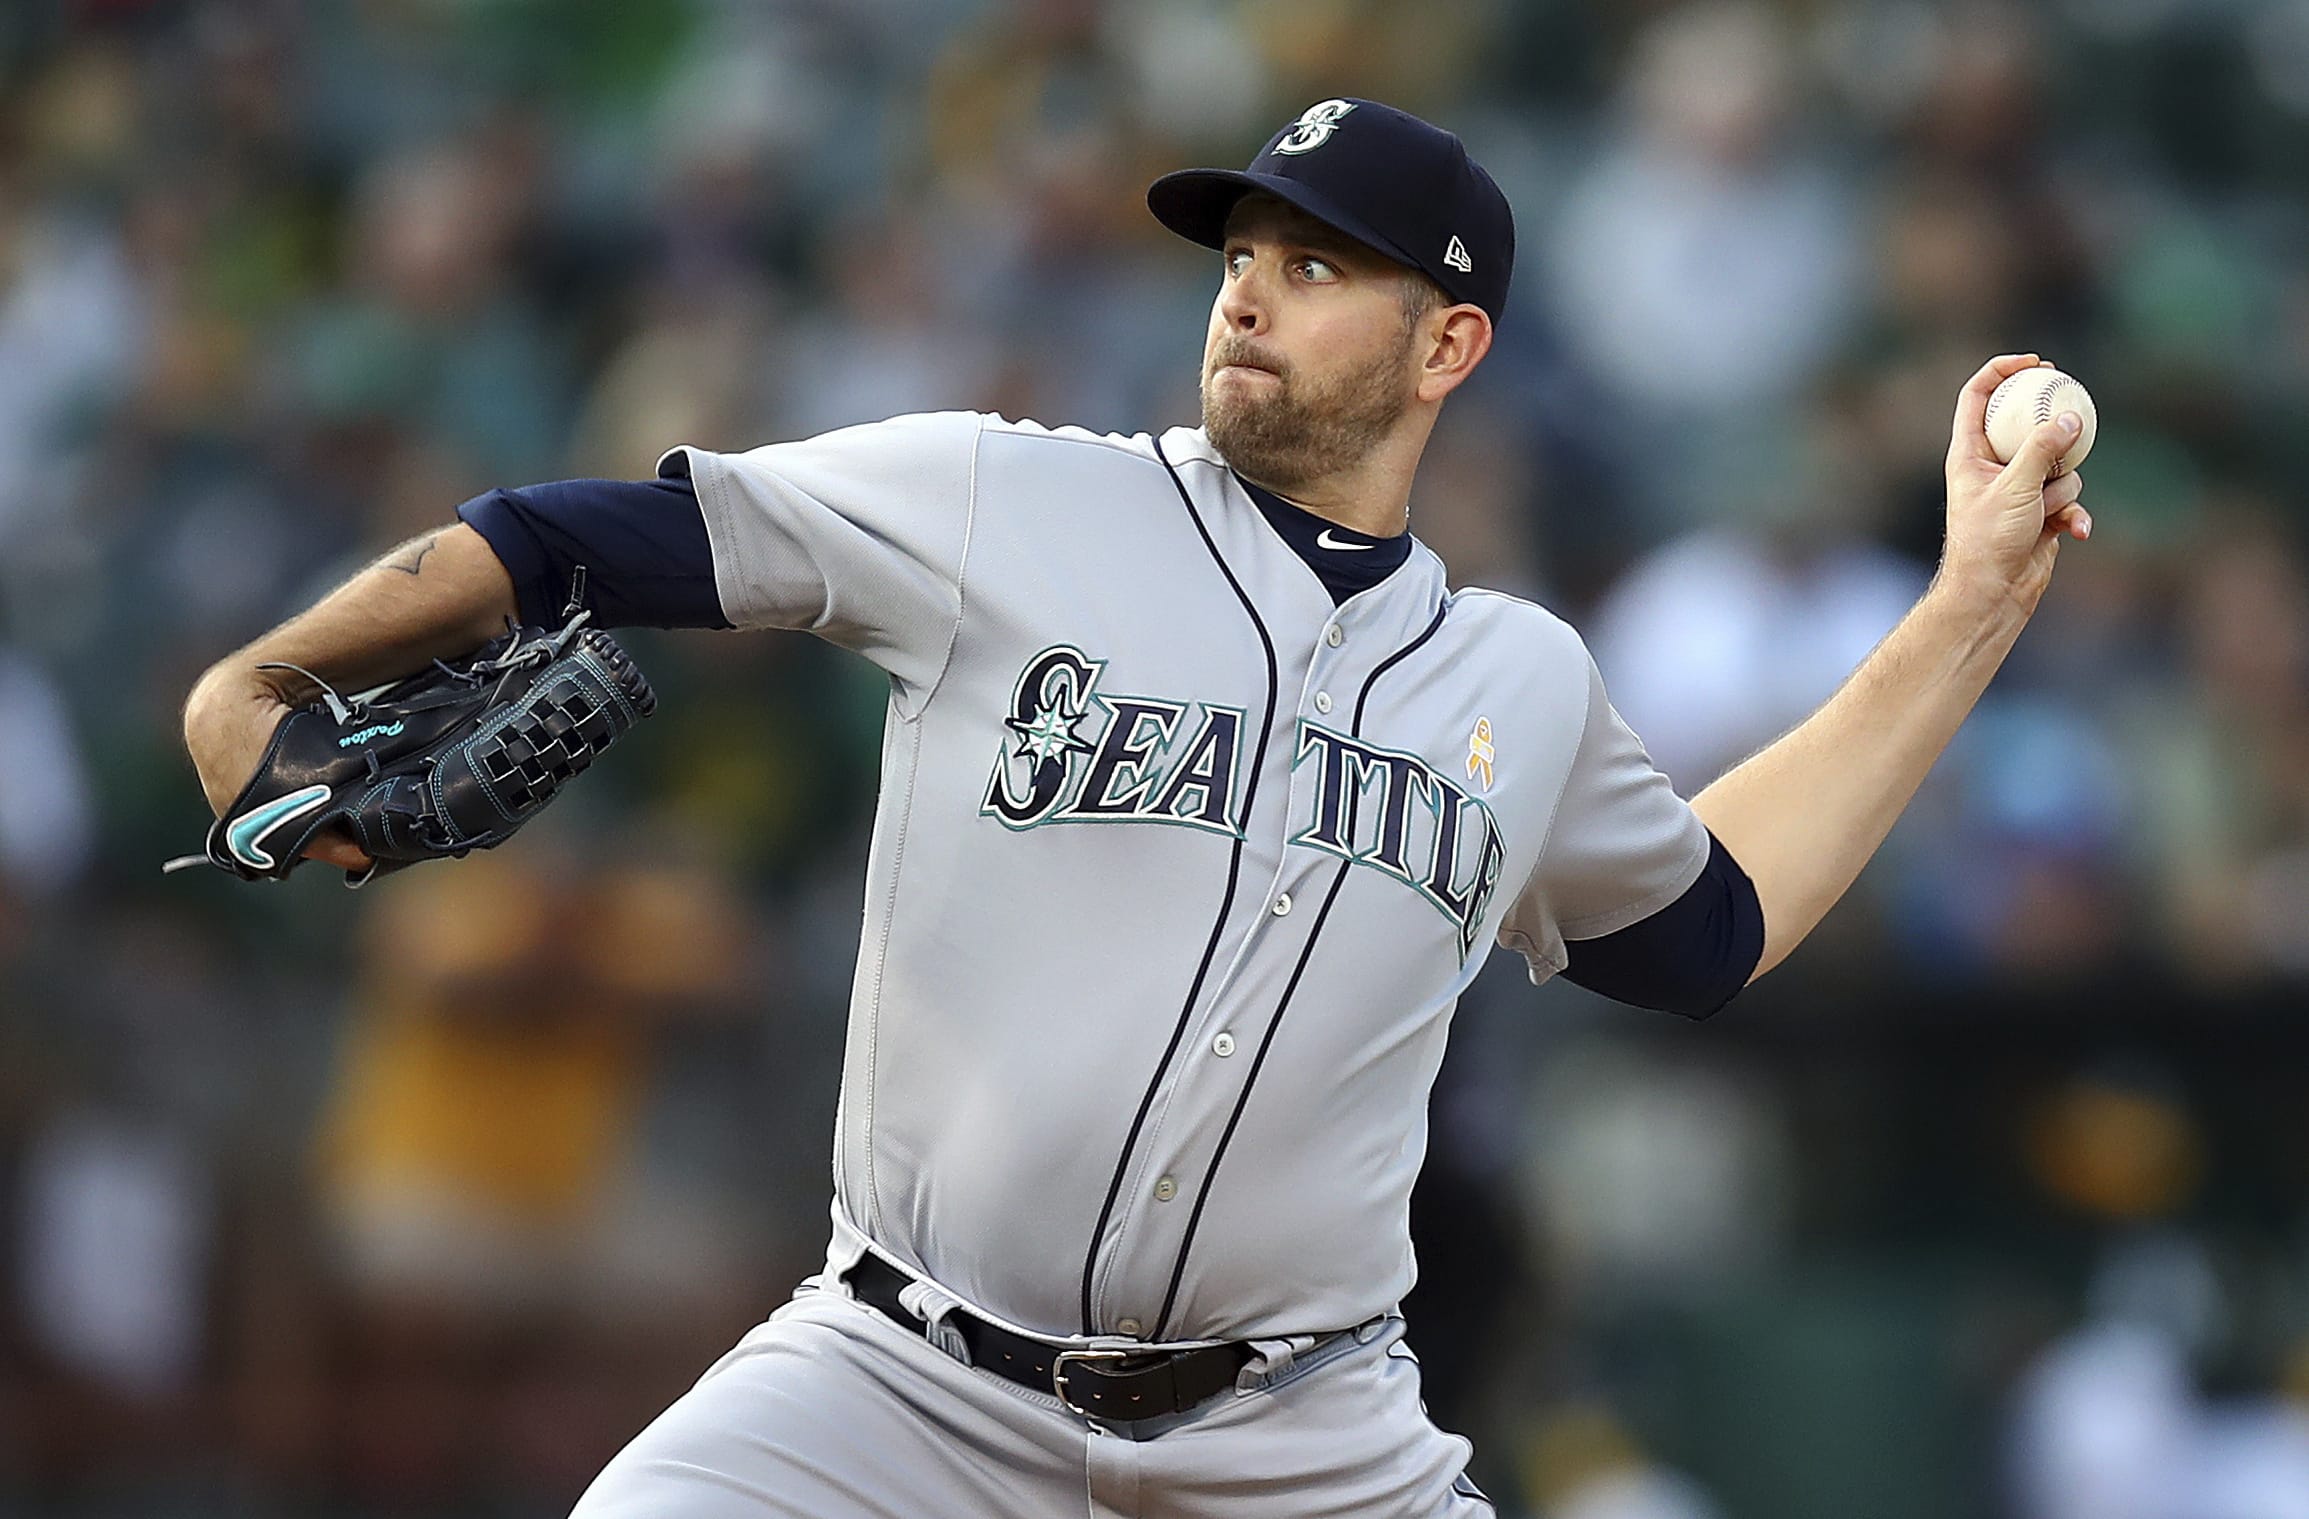 Seattle Mariners pitcher James Paxton works against the Oakland Athletics during the first inning of a baseball game Saturday, Sept. 1, 2018, in Oakland, Calif.